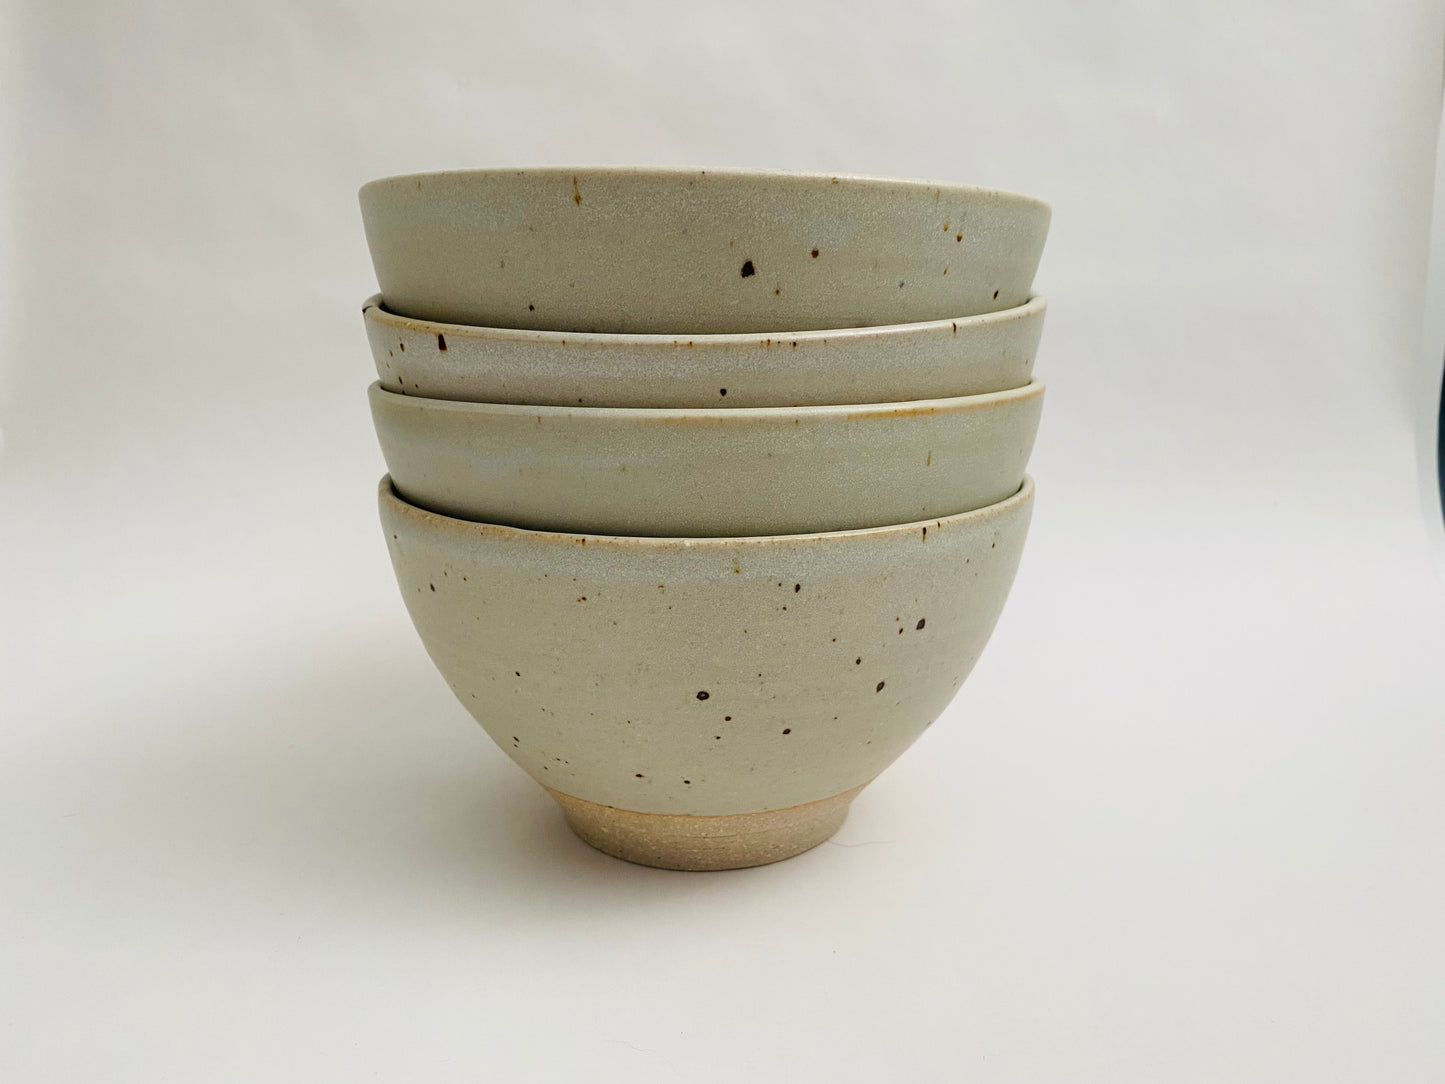 A set of 4 ramen bowls in a matte glaze with speckles